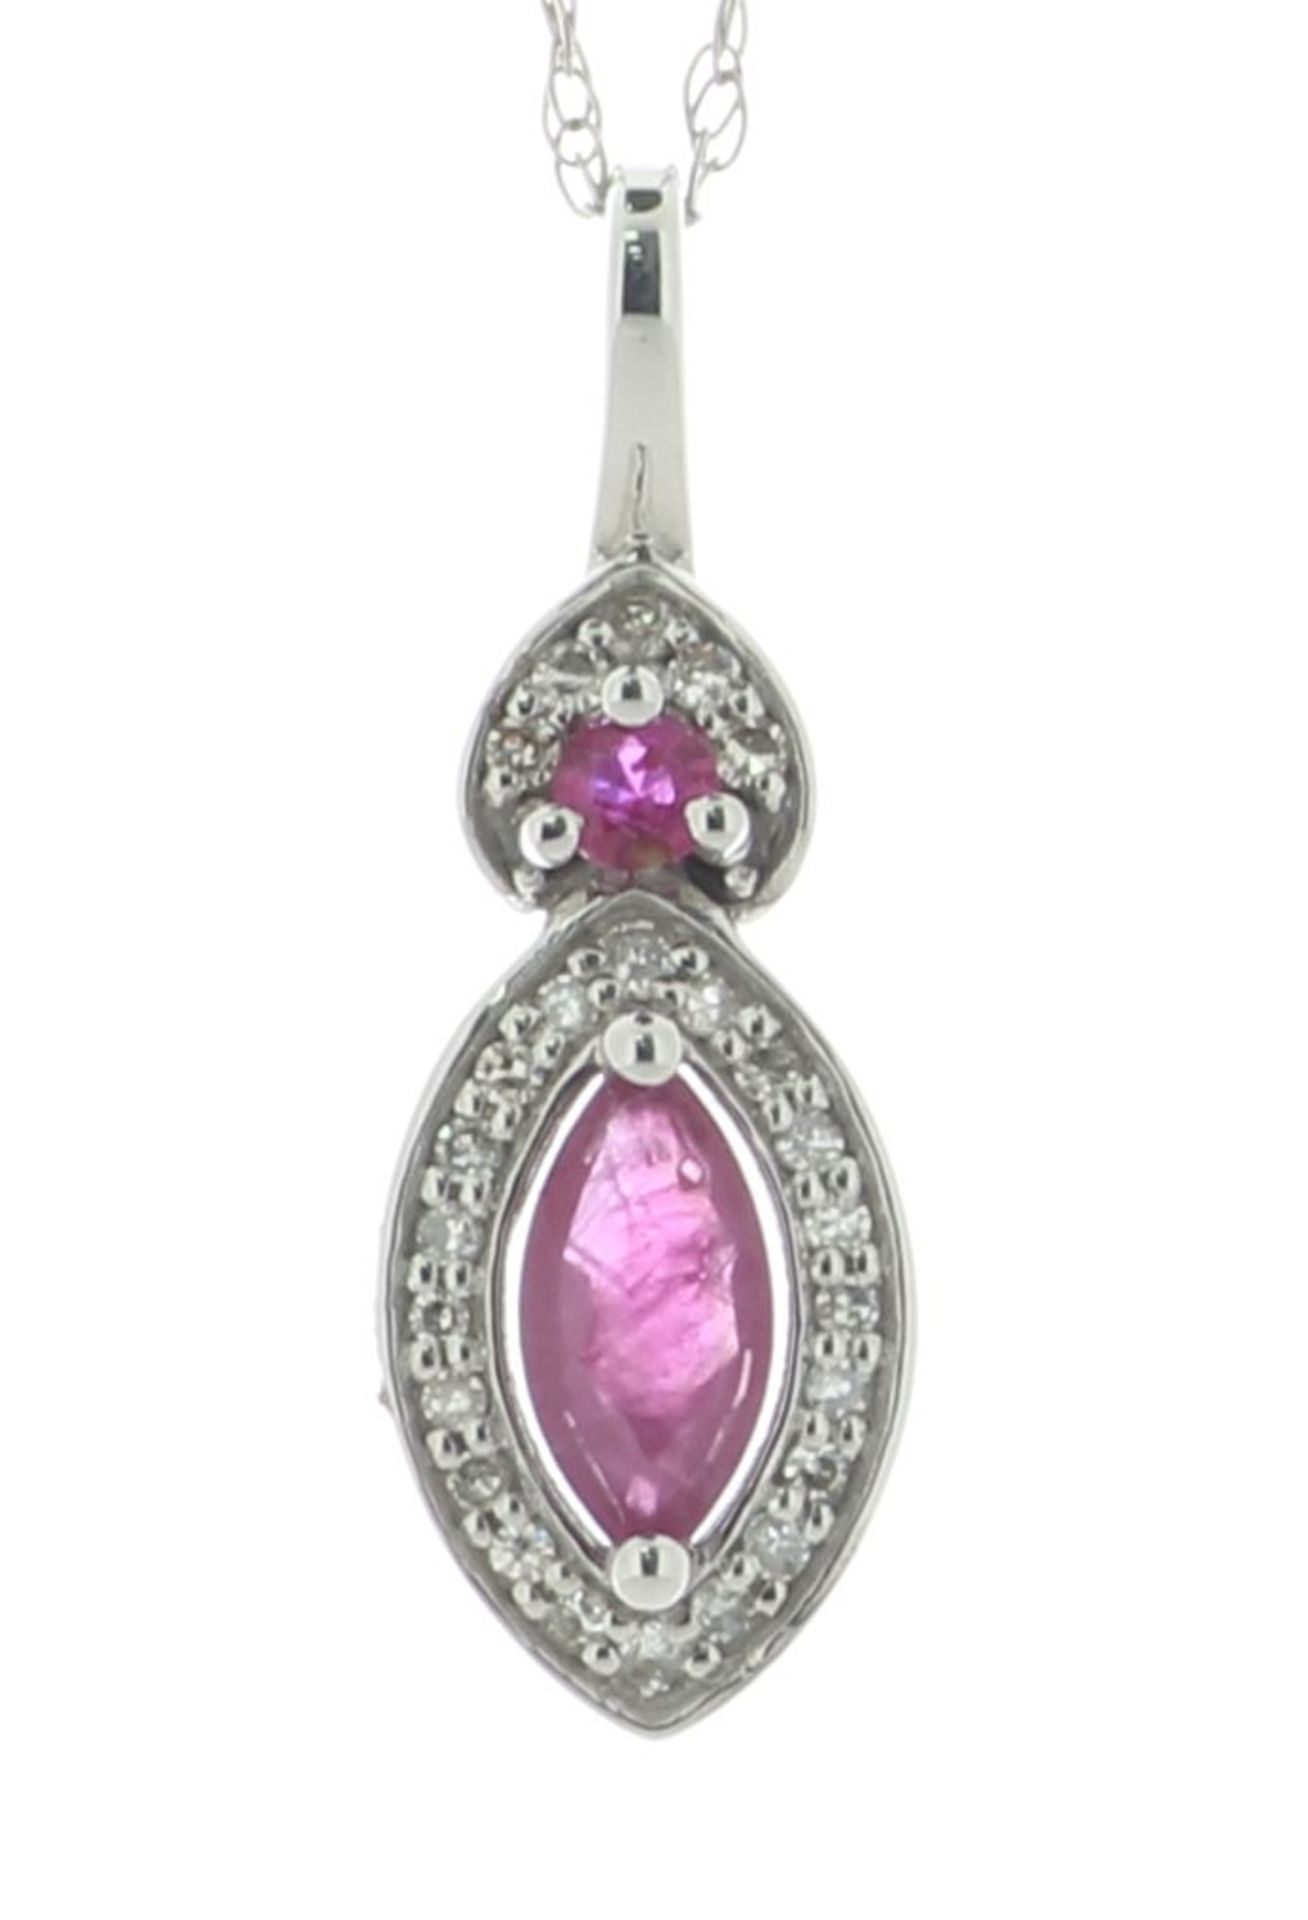 14ct White Gold Marquise Cluster Diamond And Ruby Pendant And chain 0.08 Carats - Valued By IDI £1, - Image 2 of 4